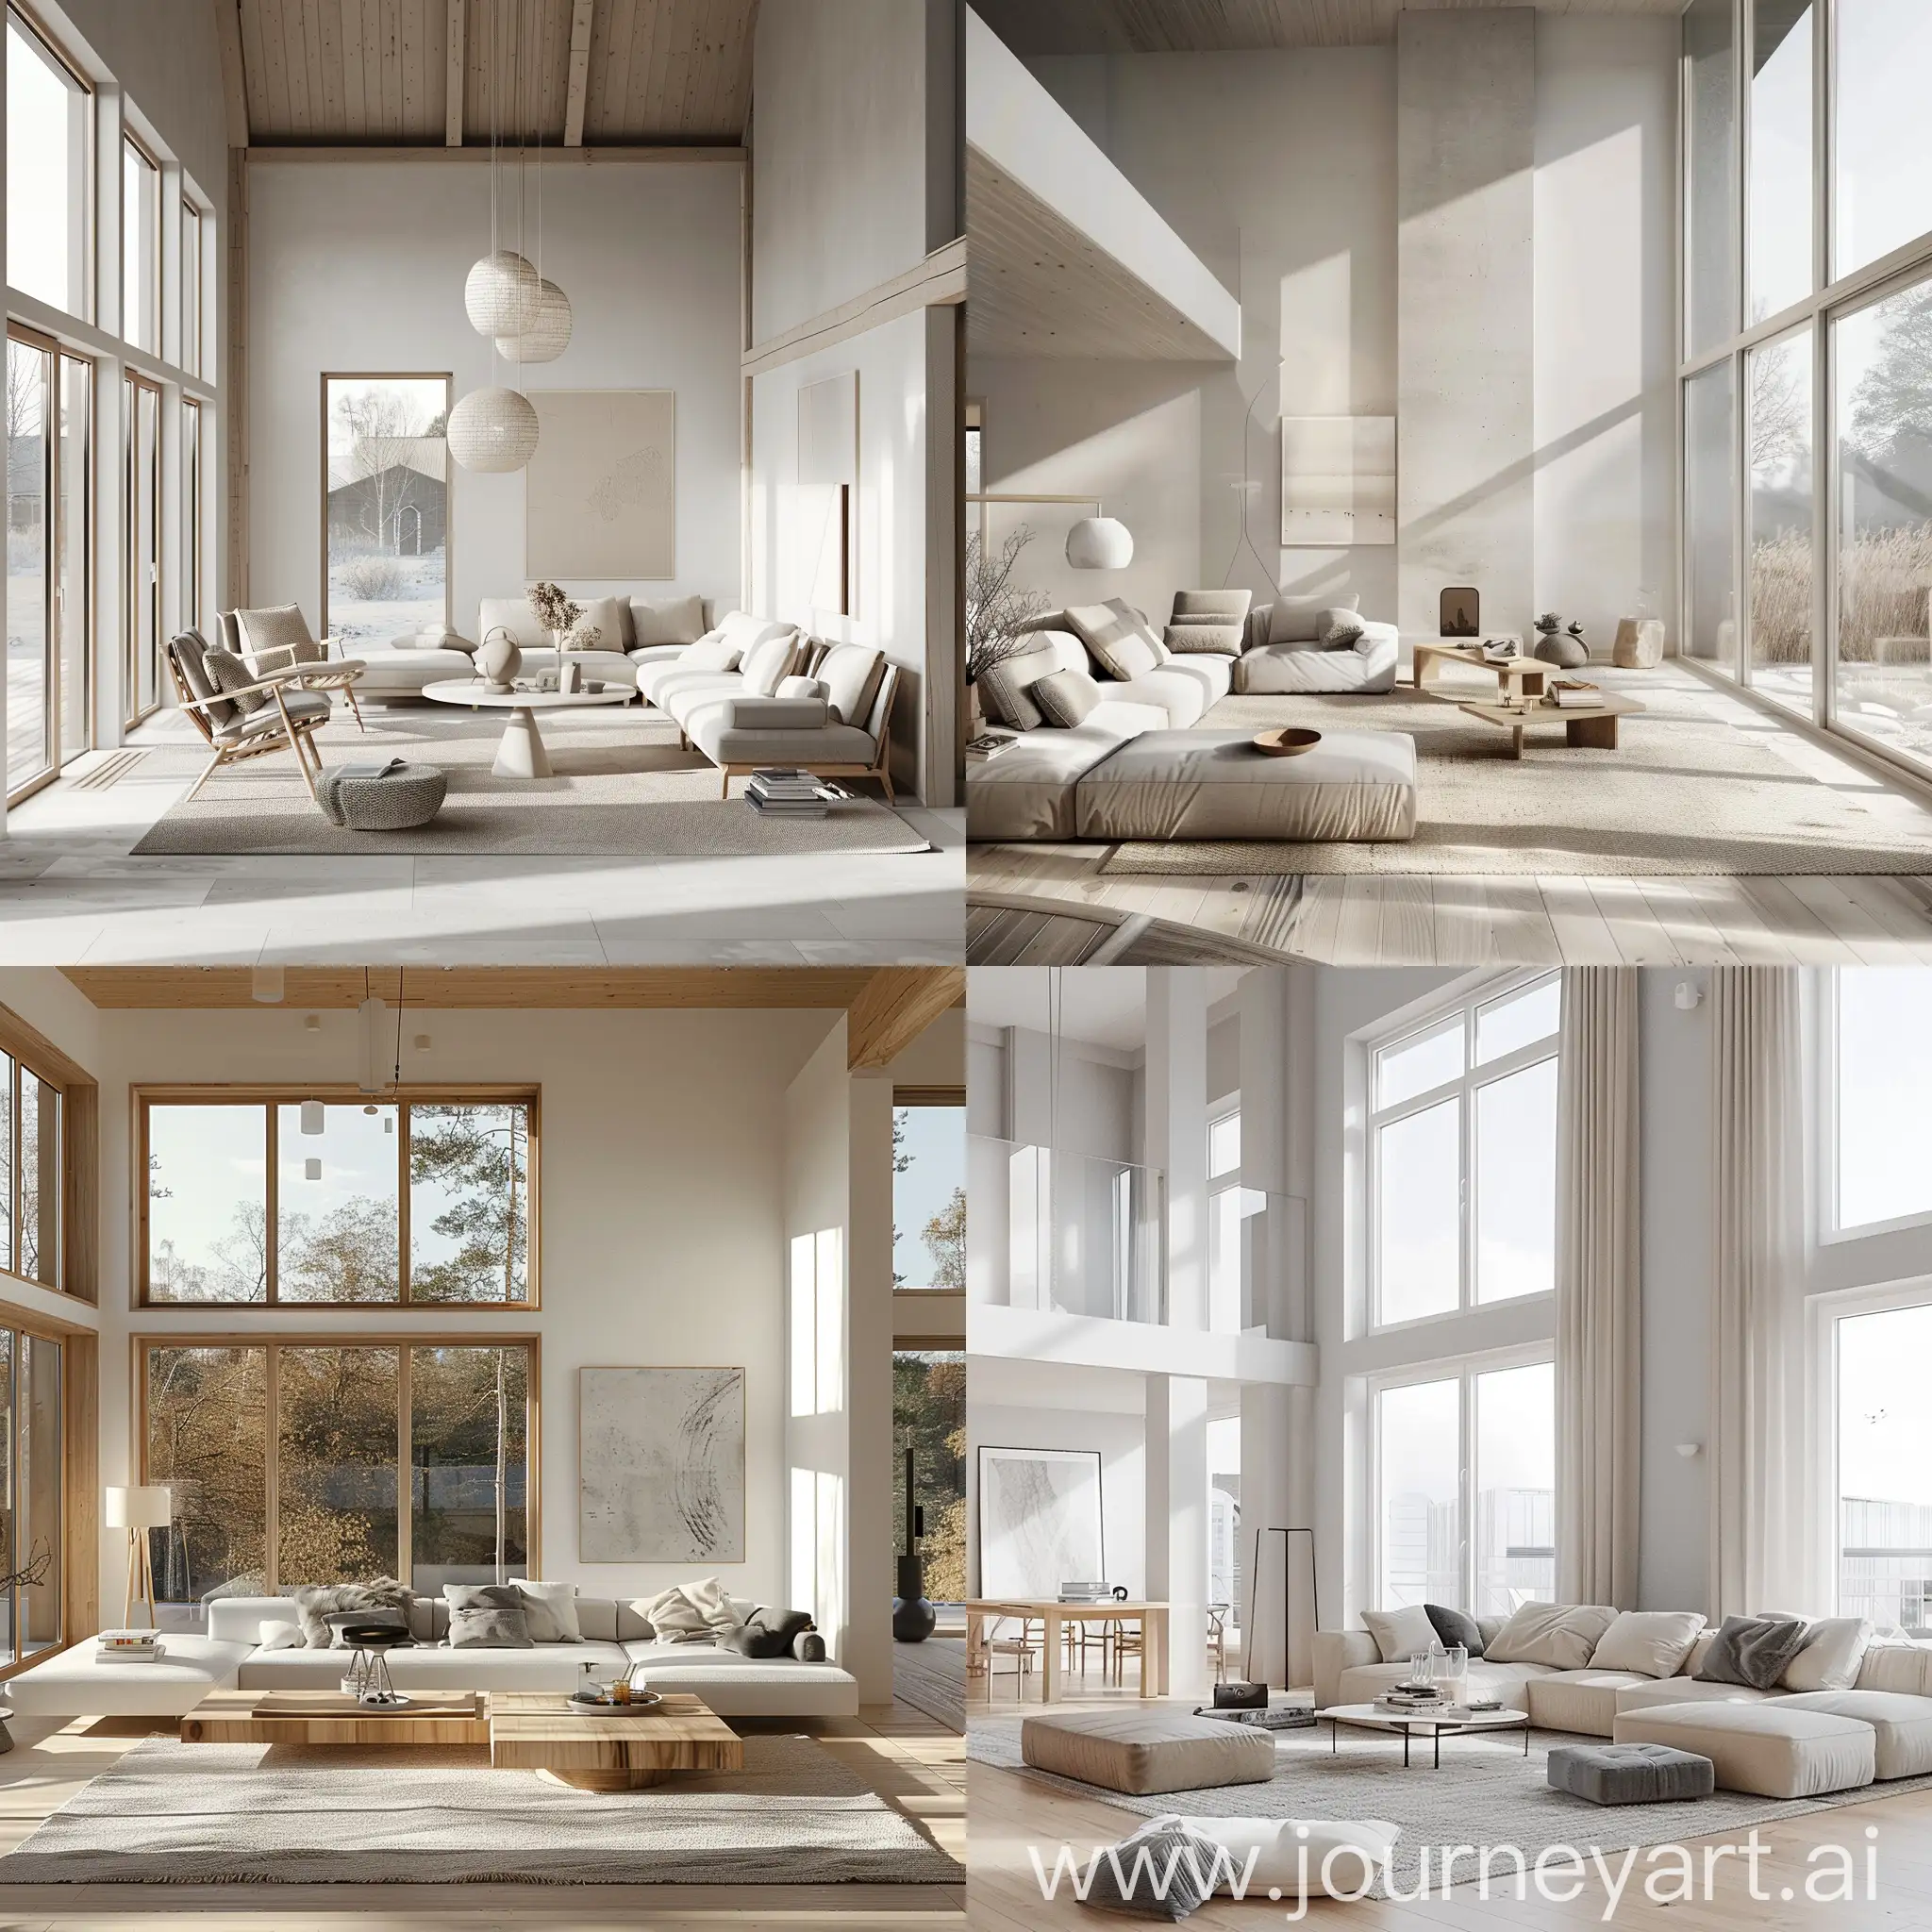 Create a spacious, well-lit living room in Nordic style with large windows, minimalist modern furniture, and light wood tones. The room should have ample natural light, white and gray color palette, and an open, uncluttered layout.